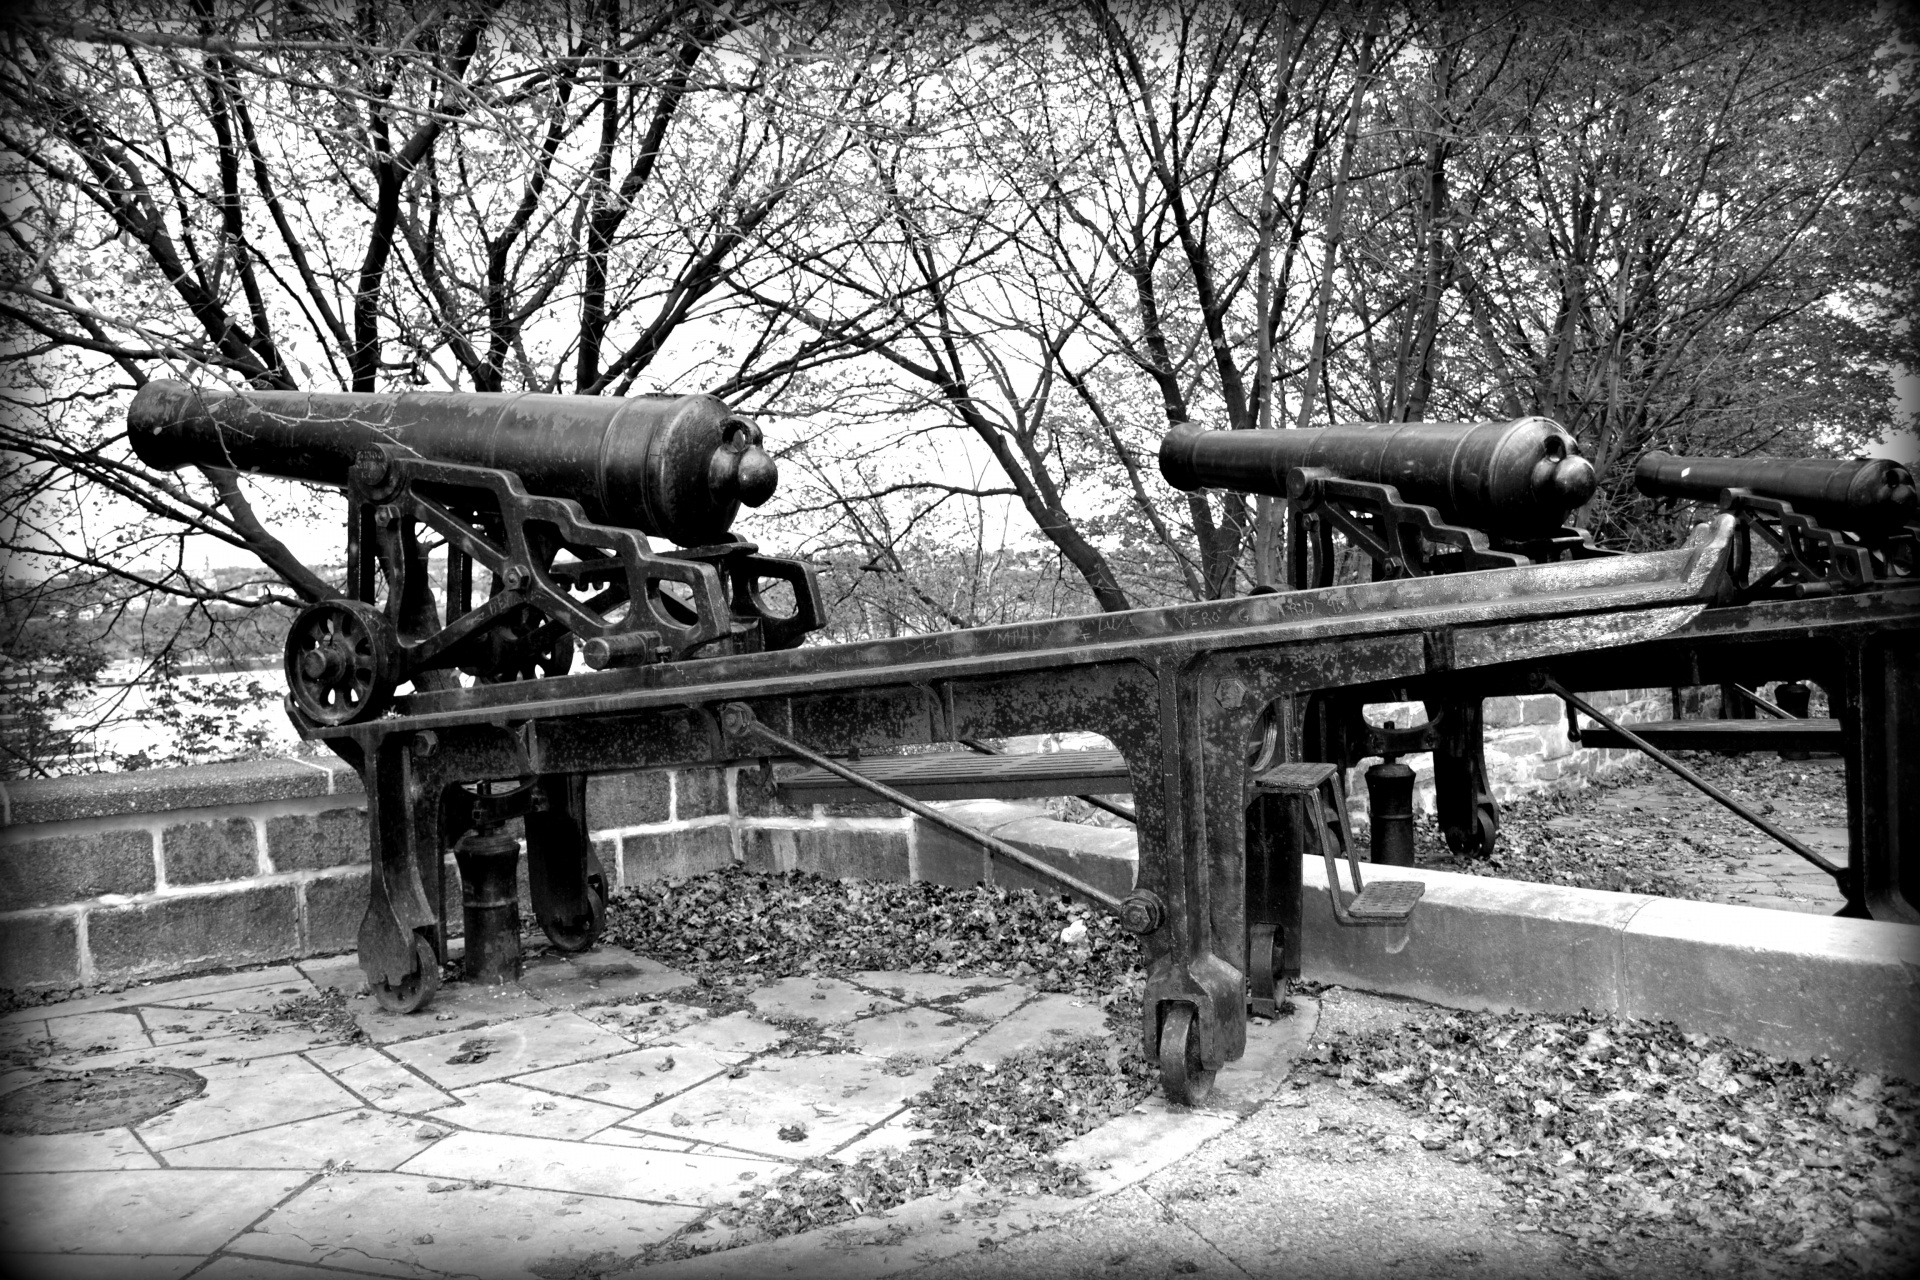 Cannons,quebec,city,black white,canada free image from